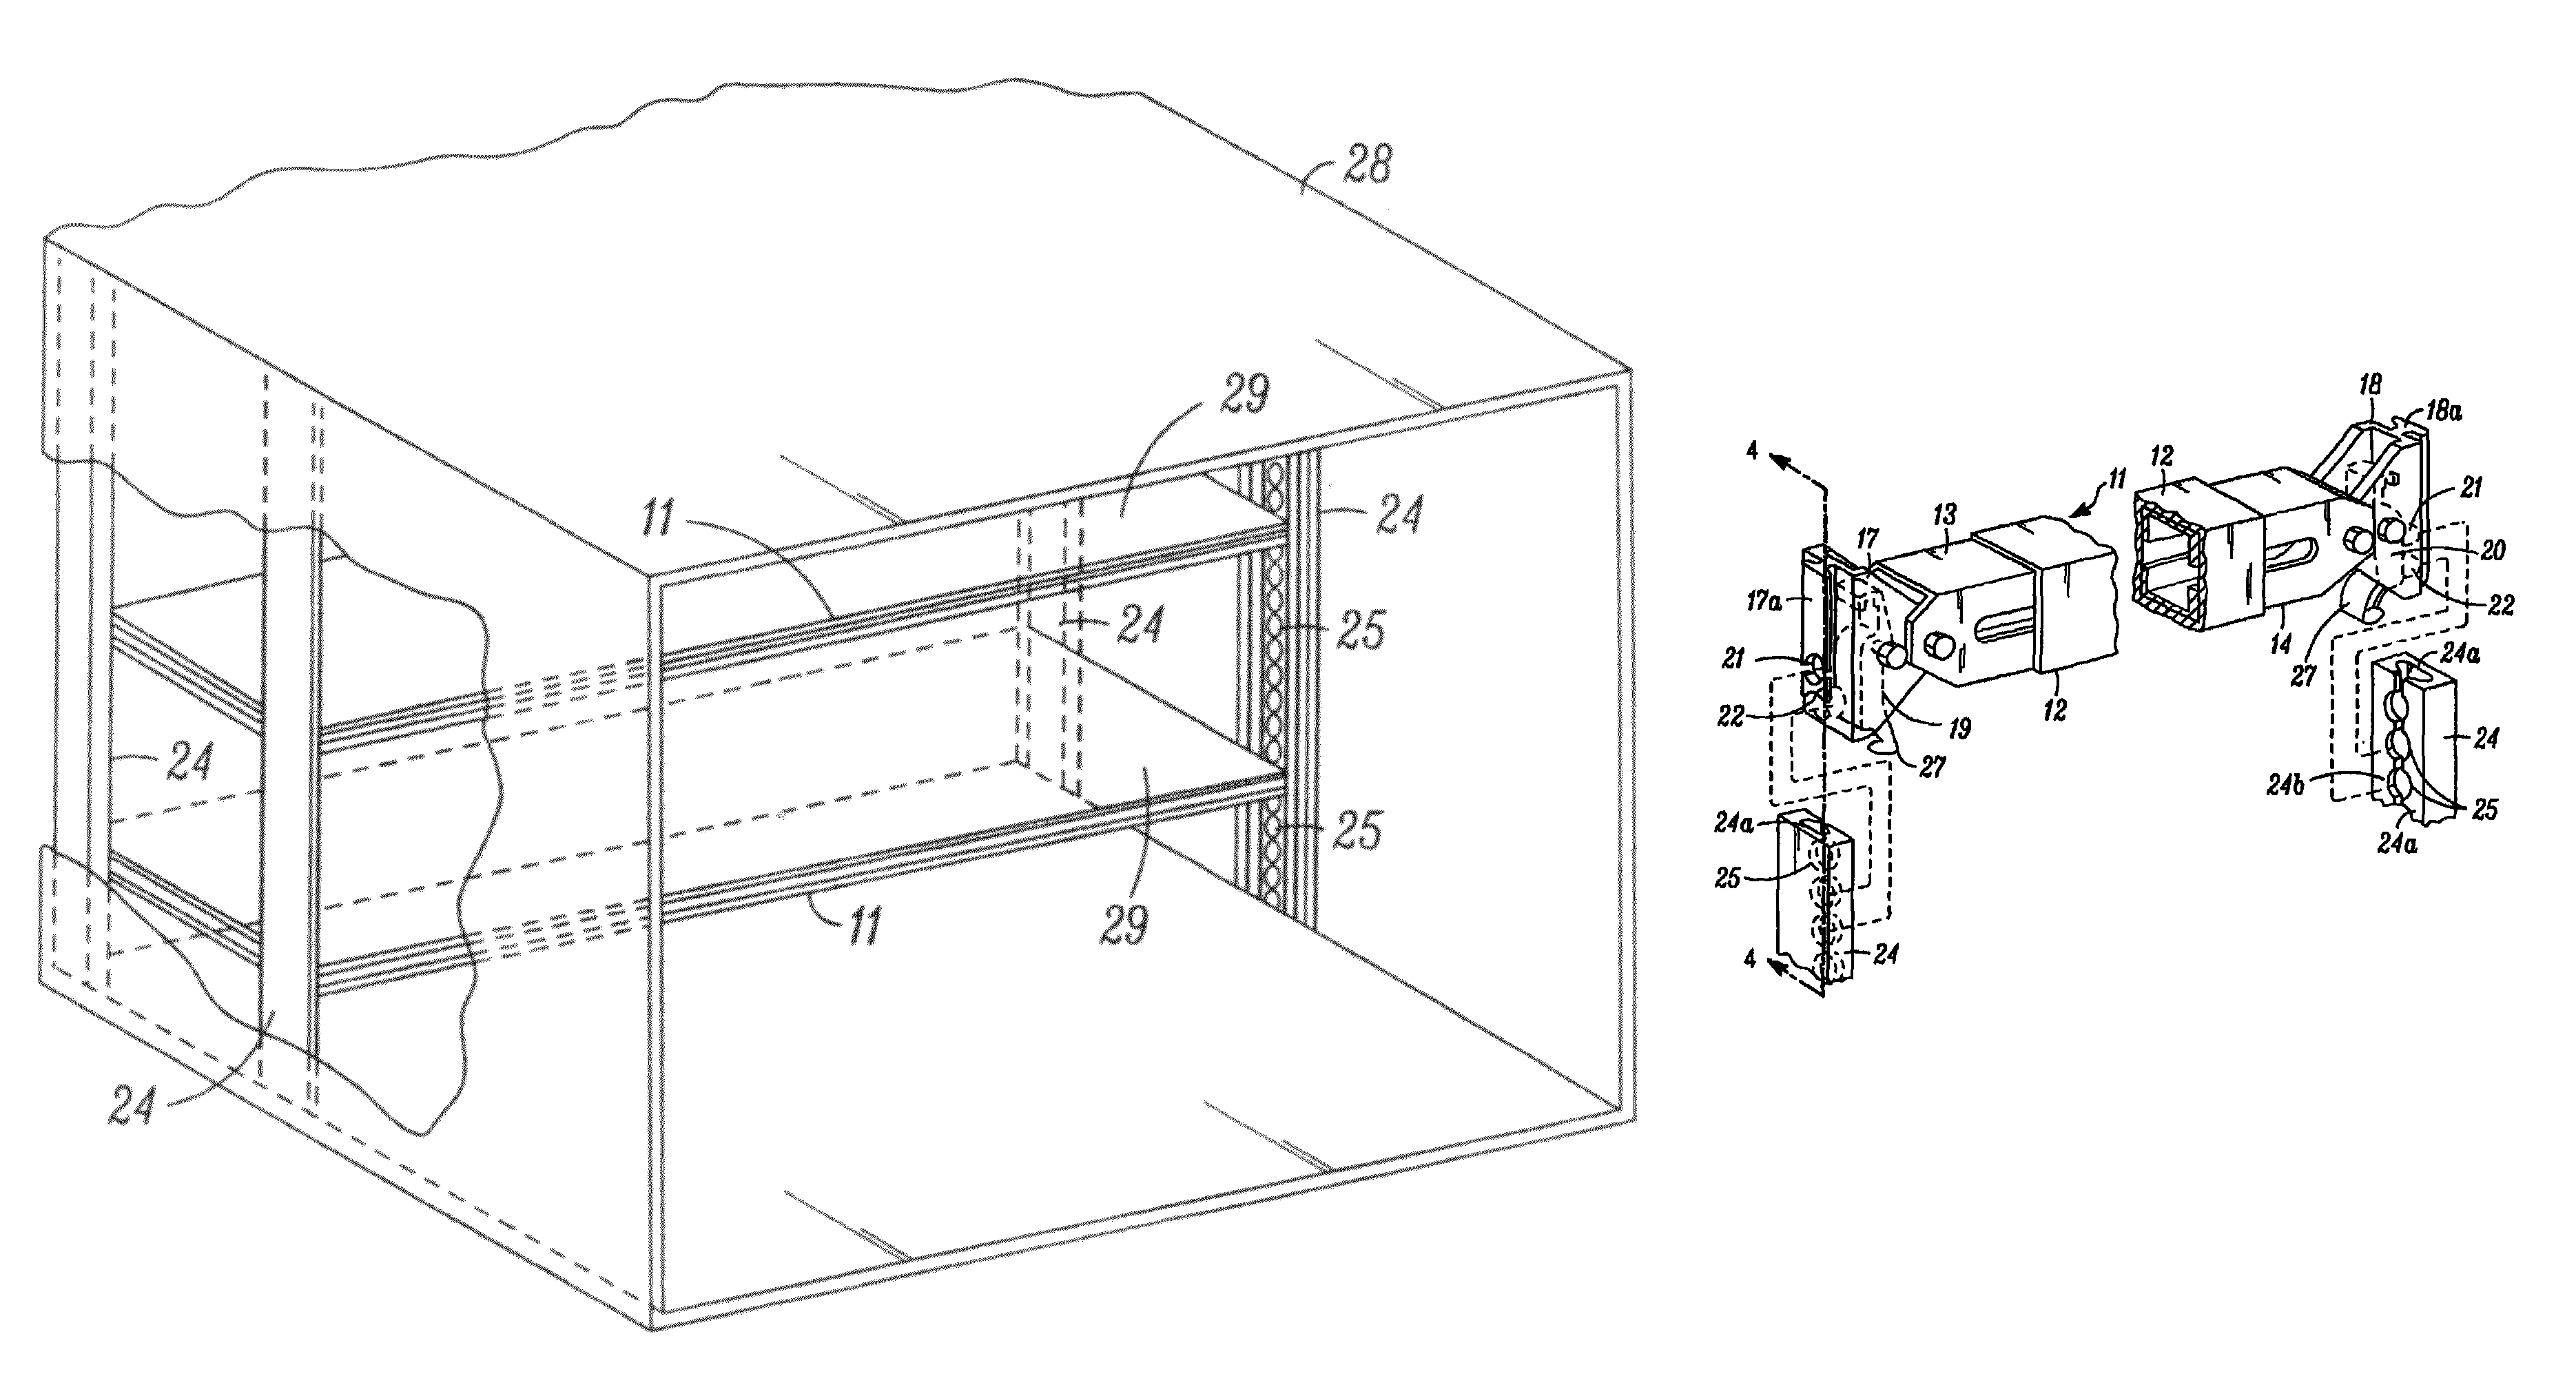 Adjustable decking system for supporting freight